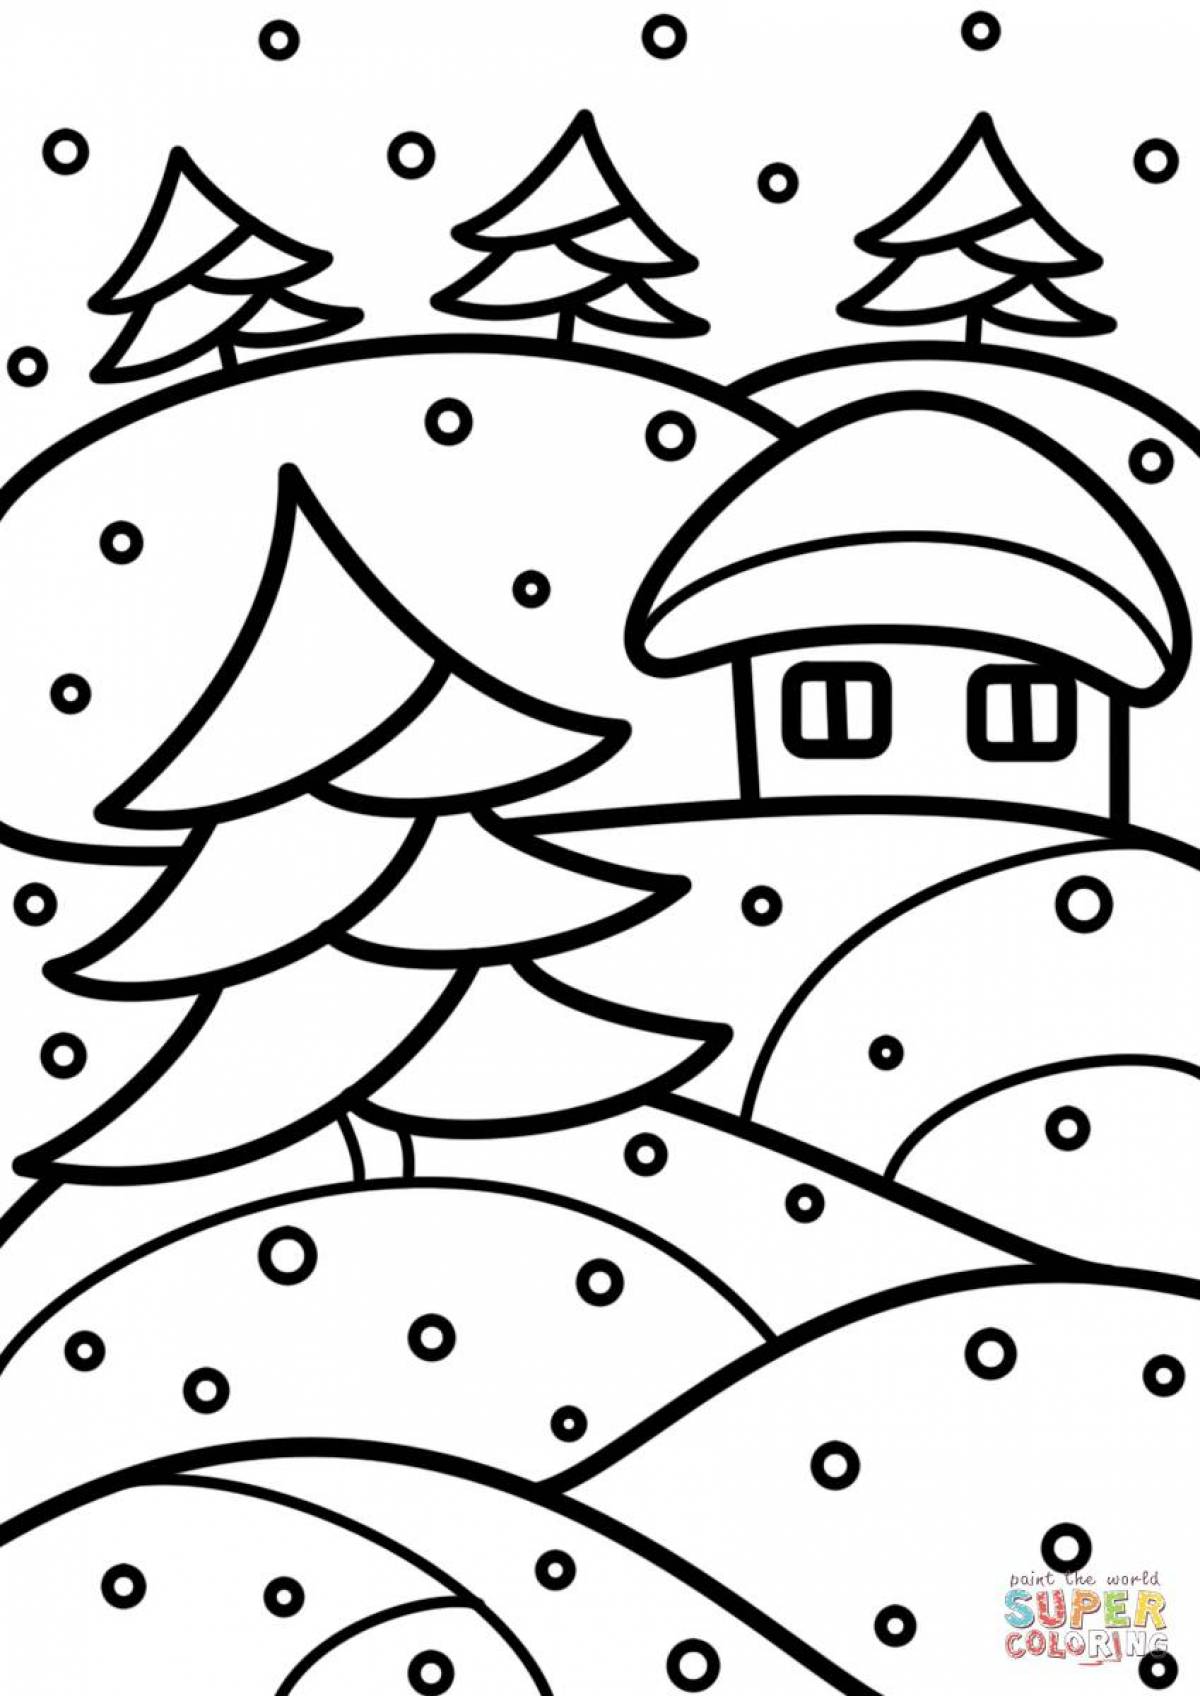 Playful winter coloring book for children 5-6 years old